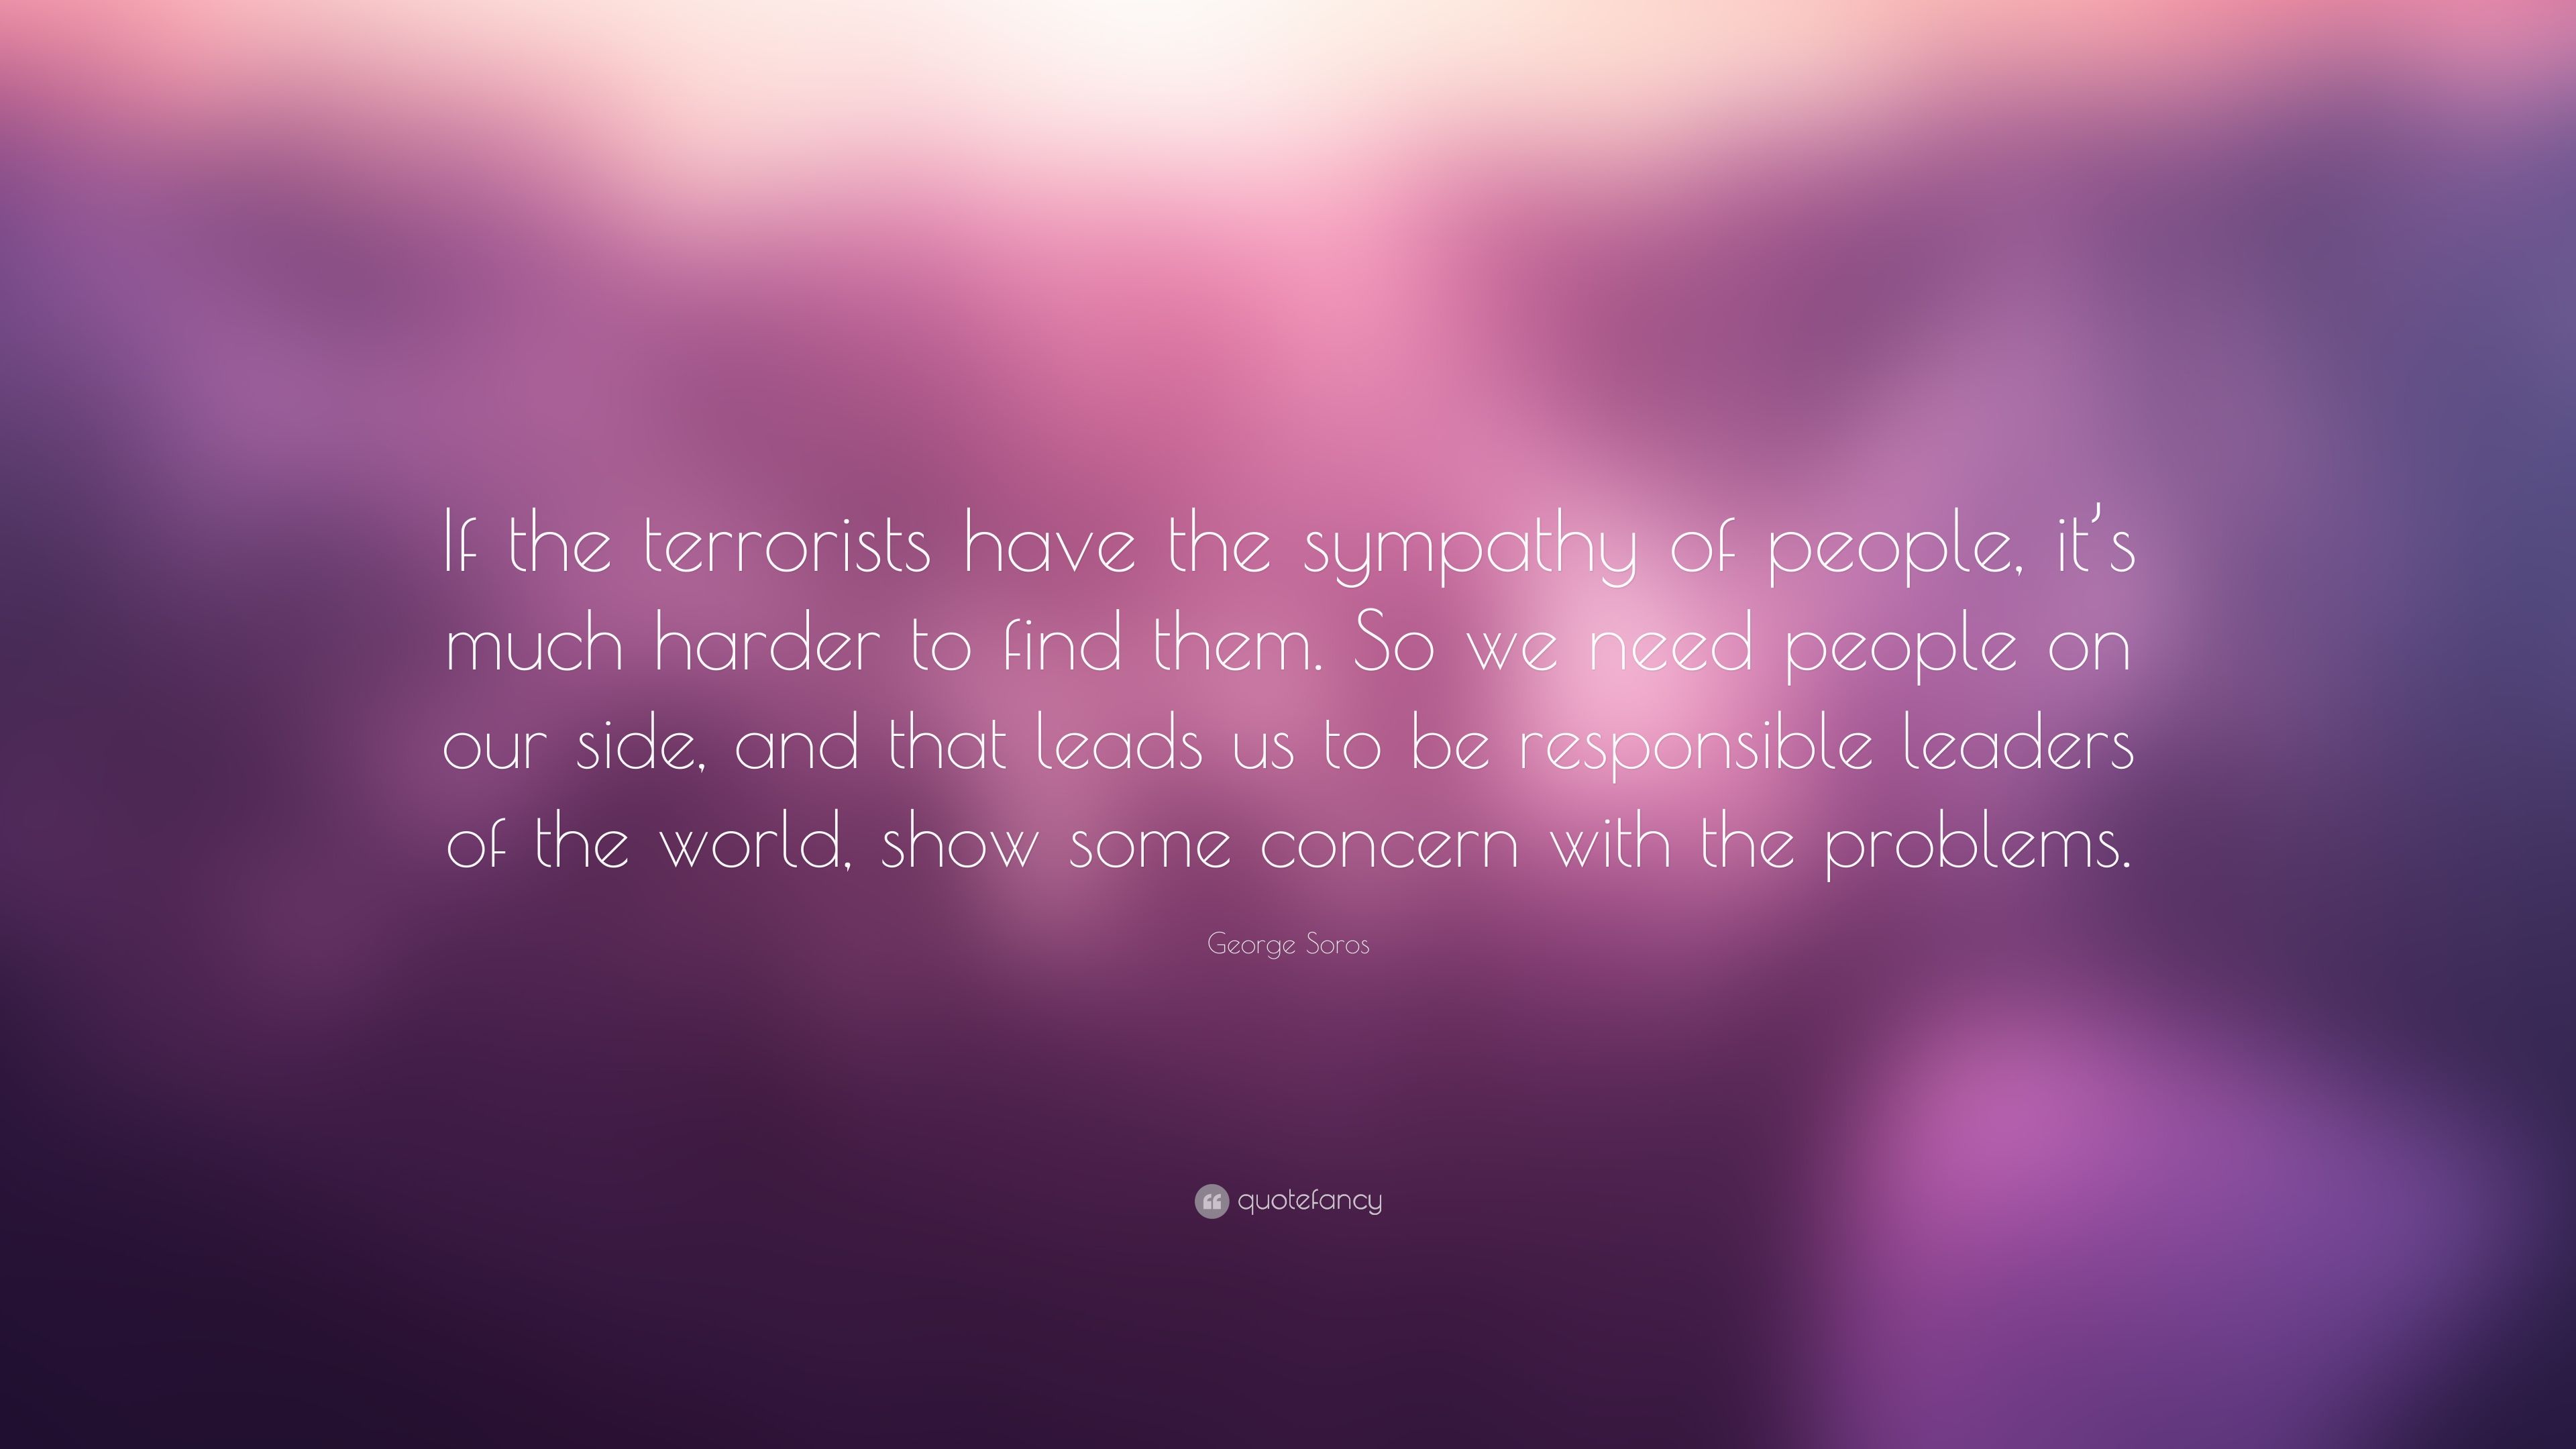 George Soros Quote: “If the terrorists have the sympathy of people, it's much harder to find them. So we need people on our side, and that le.” (7 wallpaper)